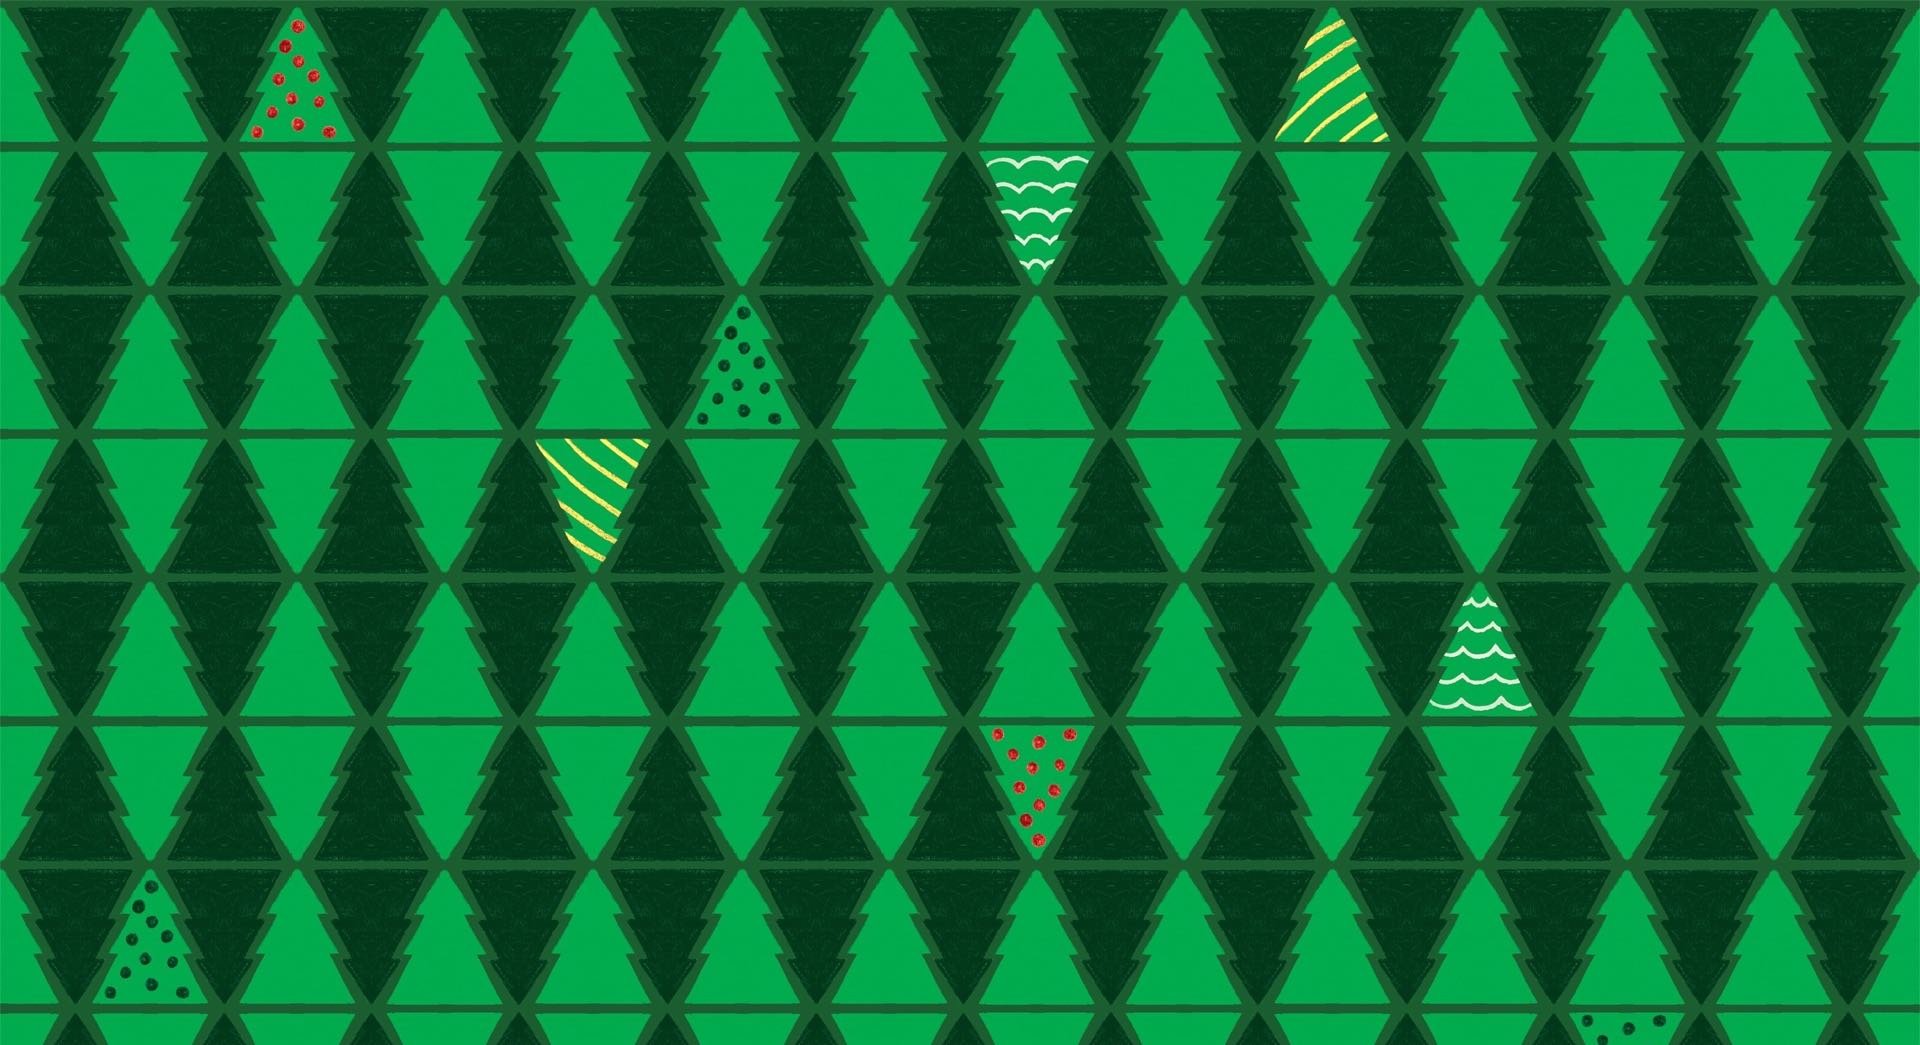 Retro wrapping paper for Christmas gifts. Seamless pattern Stock